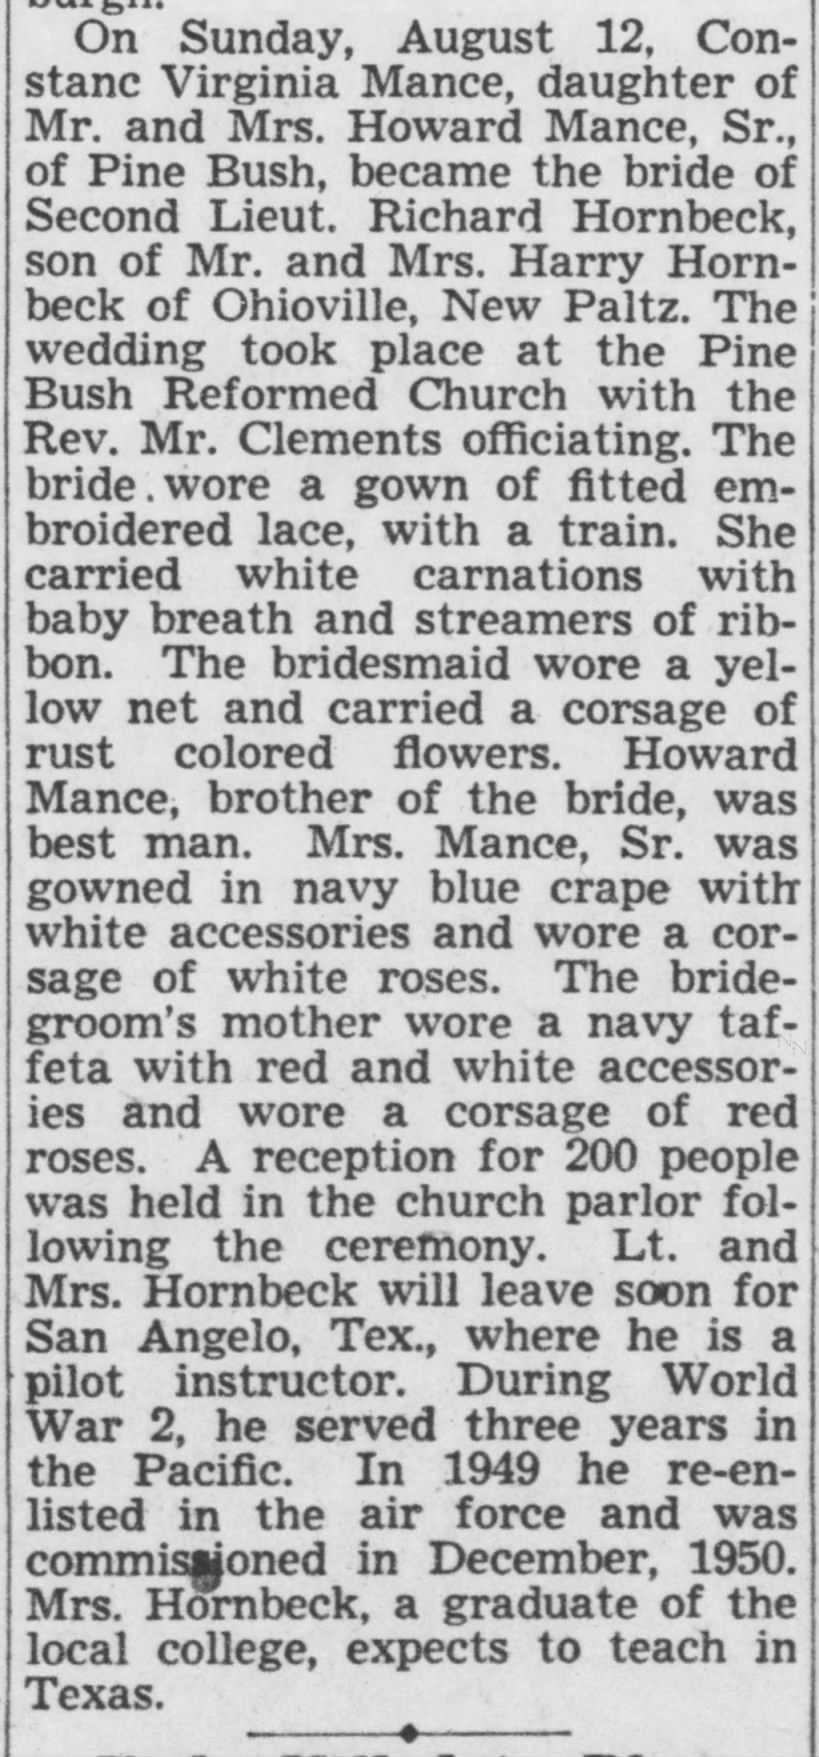 Wedding of Constance Mance and Richard Hornbeck, Kingston Daily Freeman August 25, 1951 (Page 10)